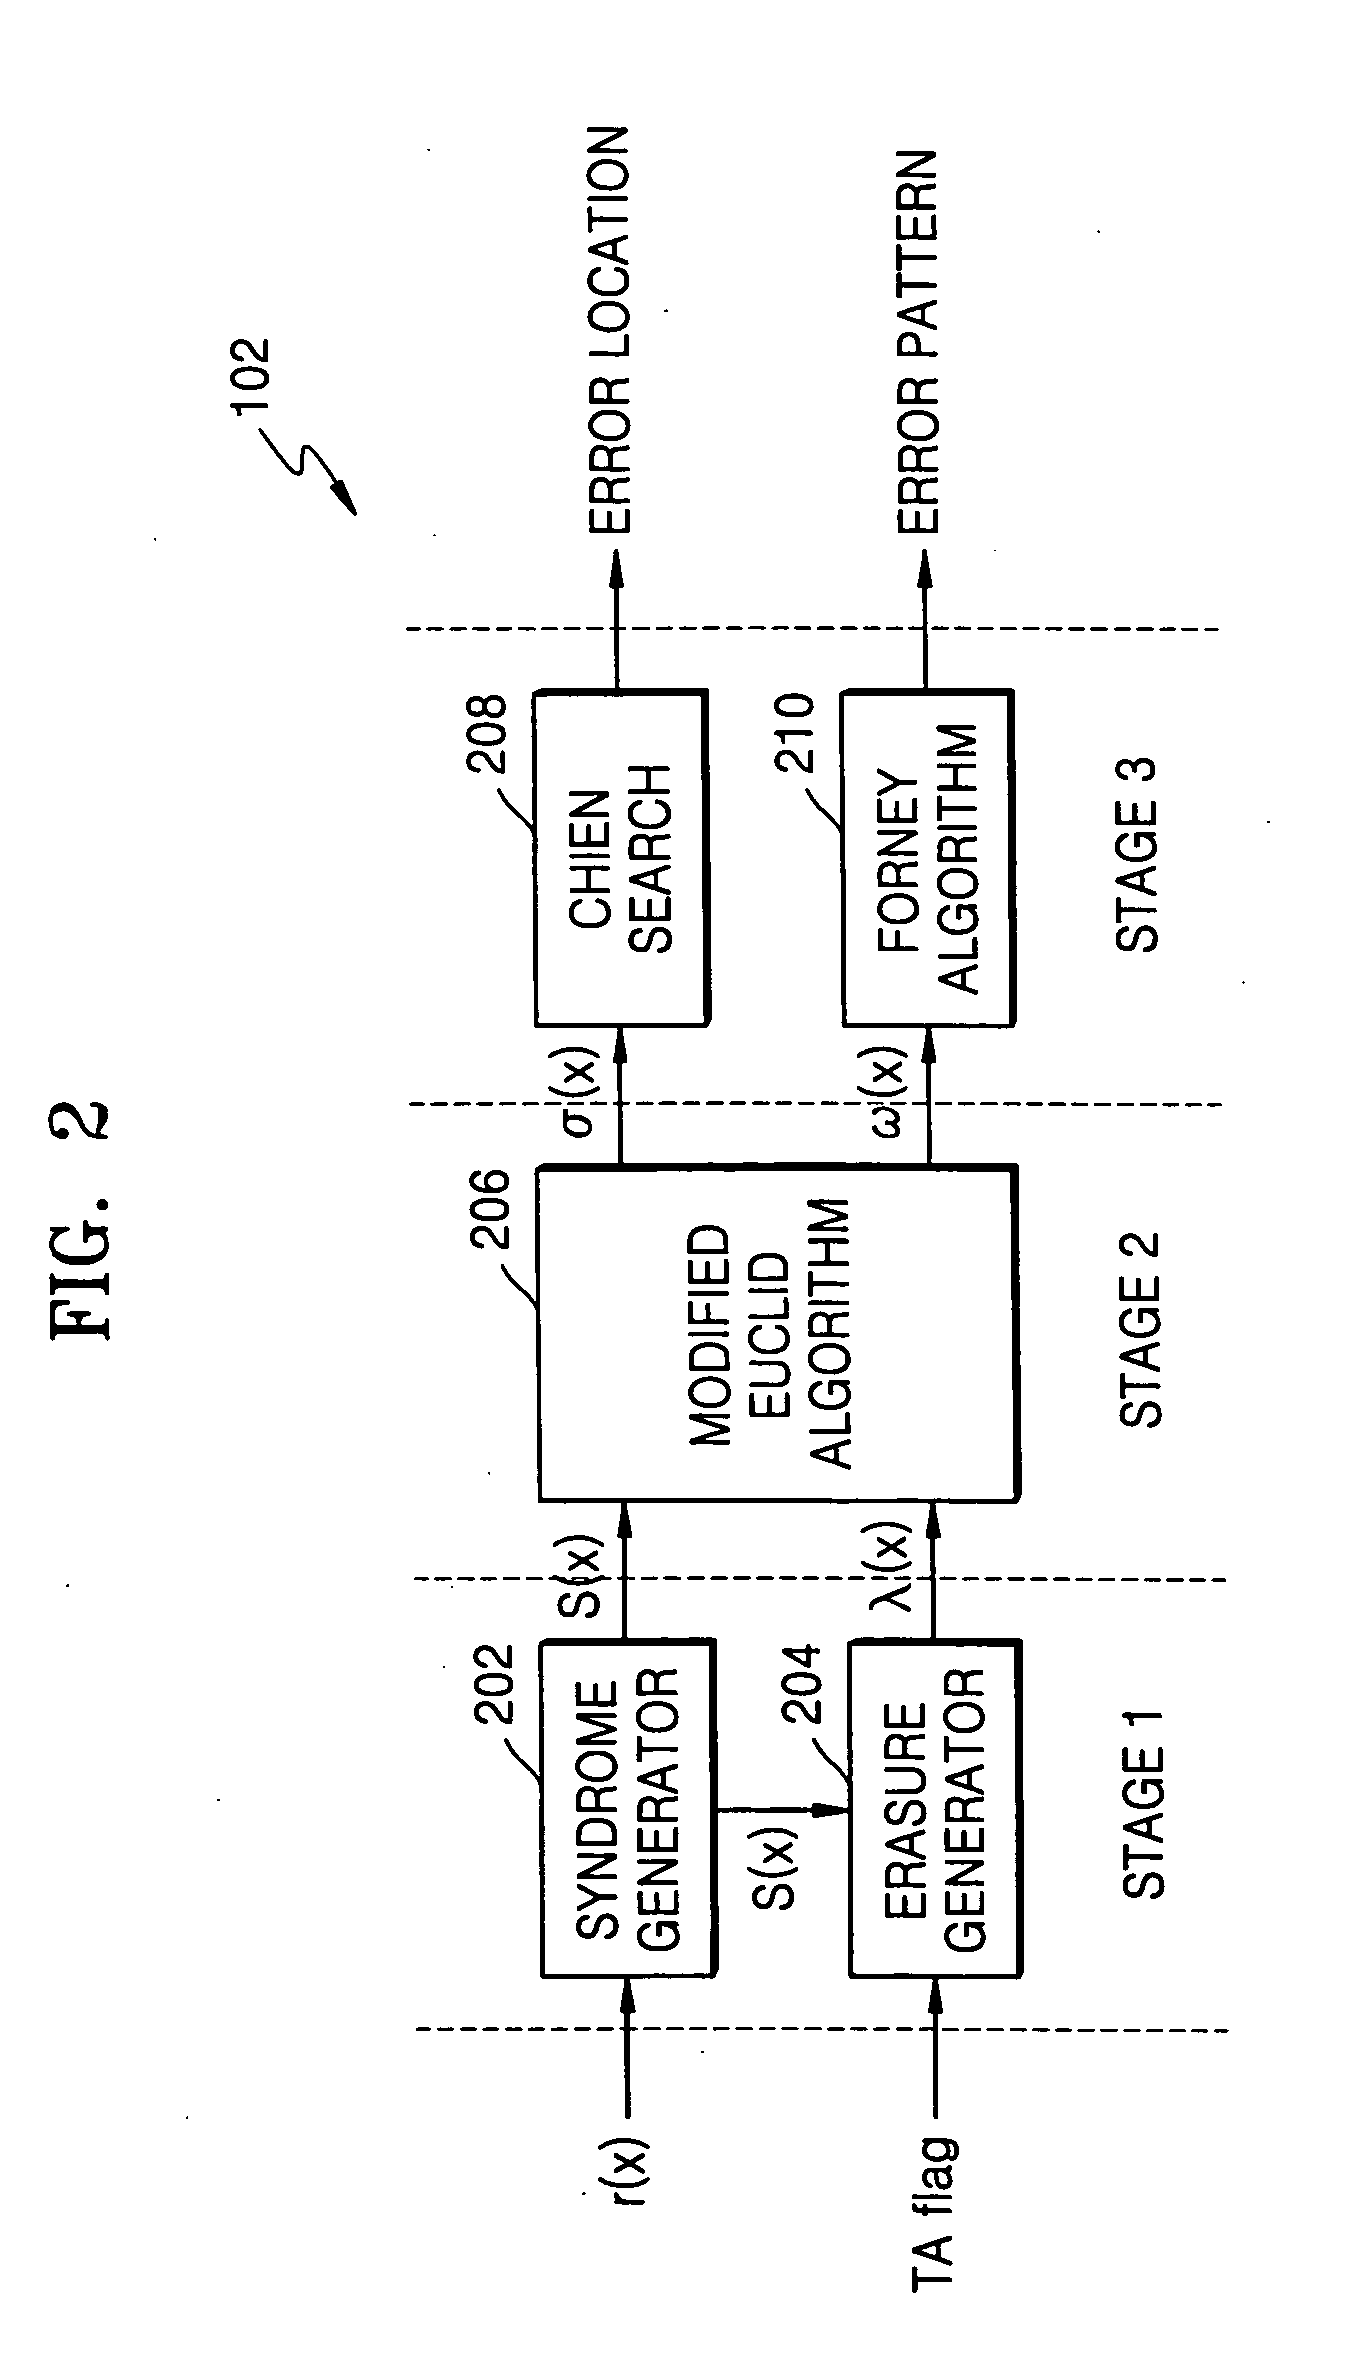 Forward Chien search type Reed-Solomon decoder circuit